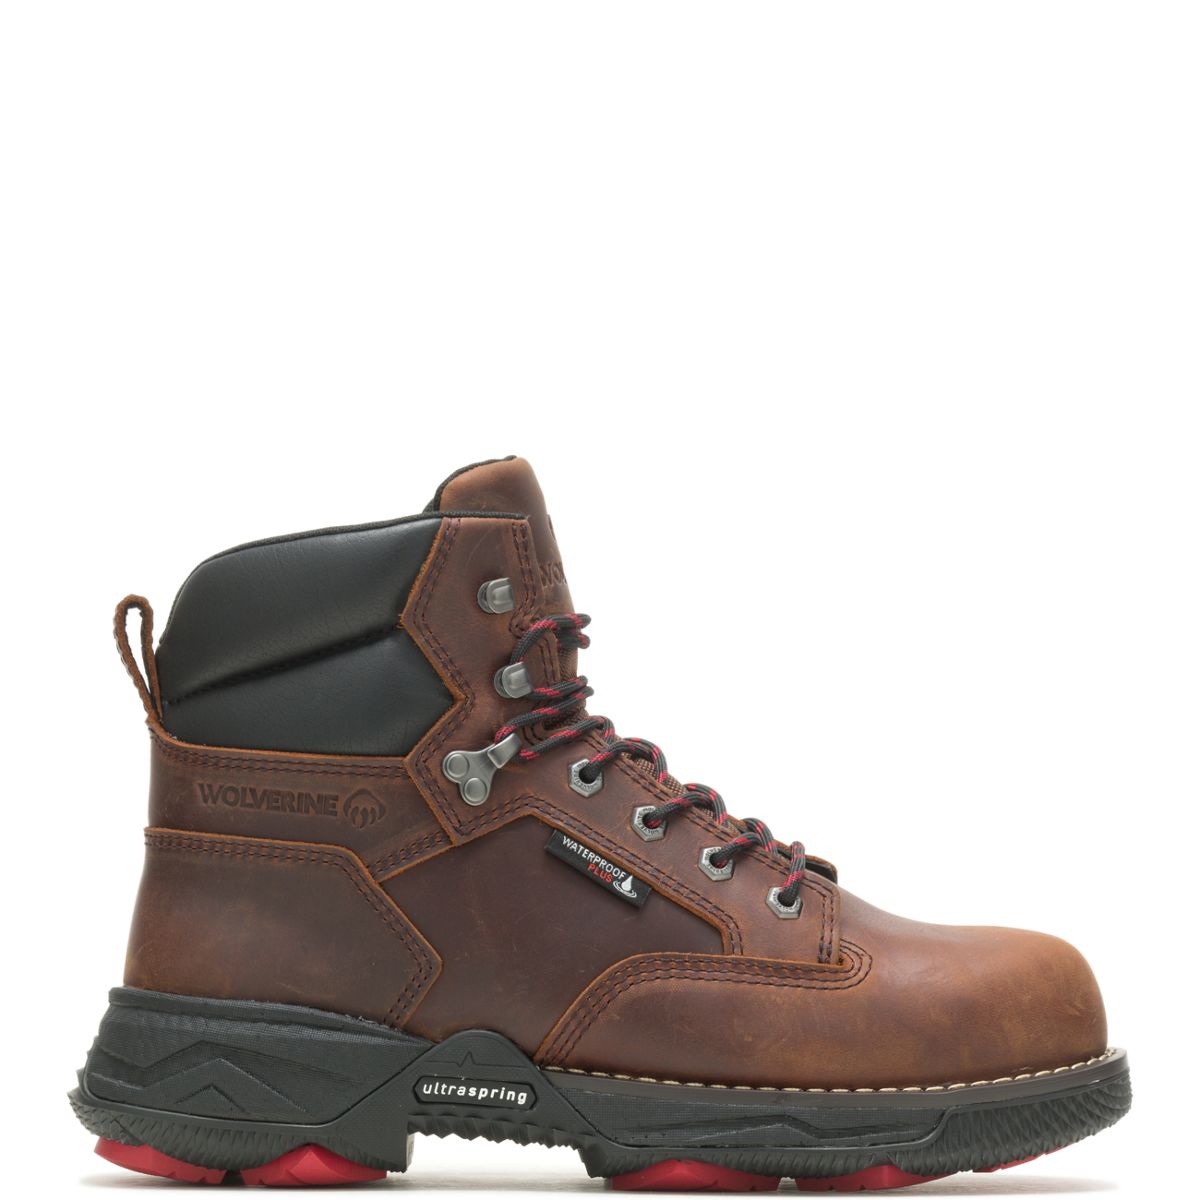 Steel Toe Work Boots & Safety Boots For Men | Wolverine